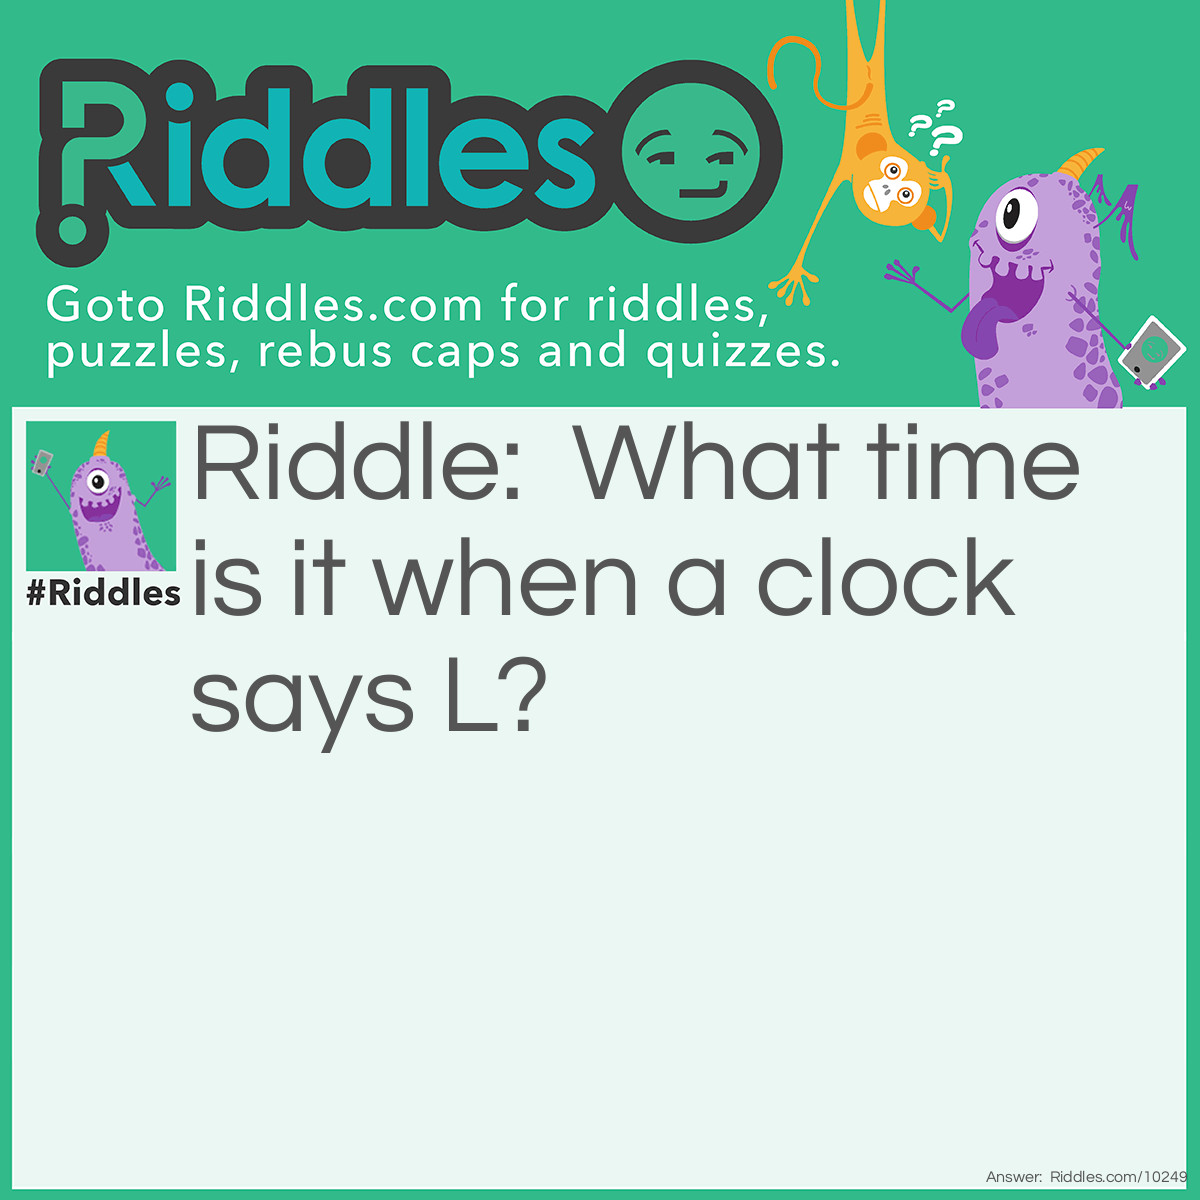 Riddle: What time is it when a clock says L? Answer: 3:00